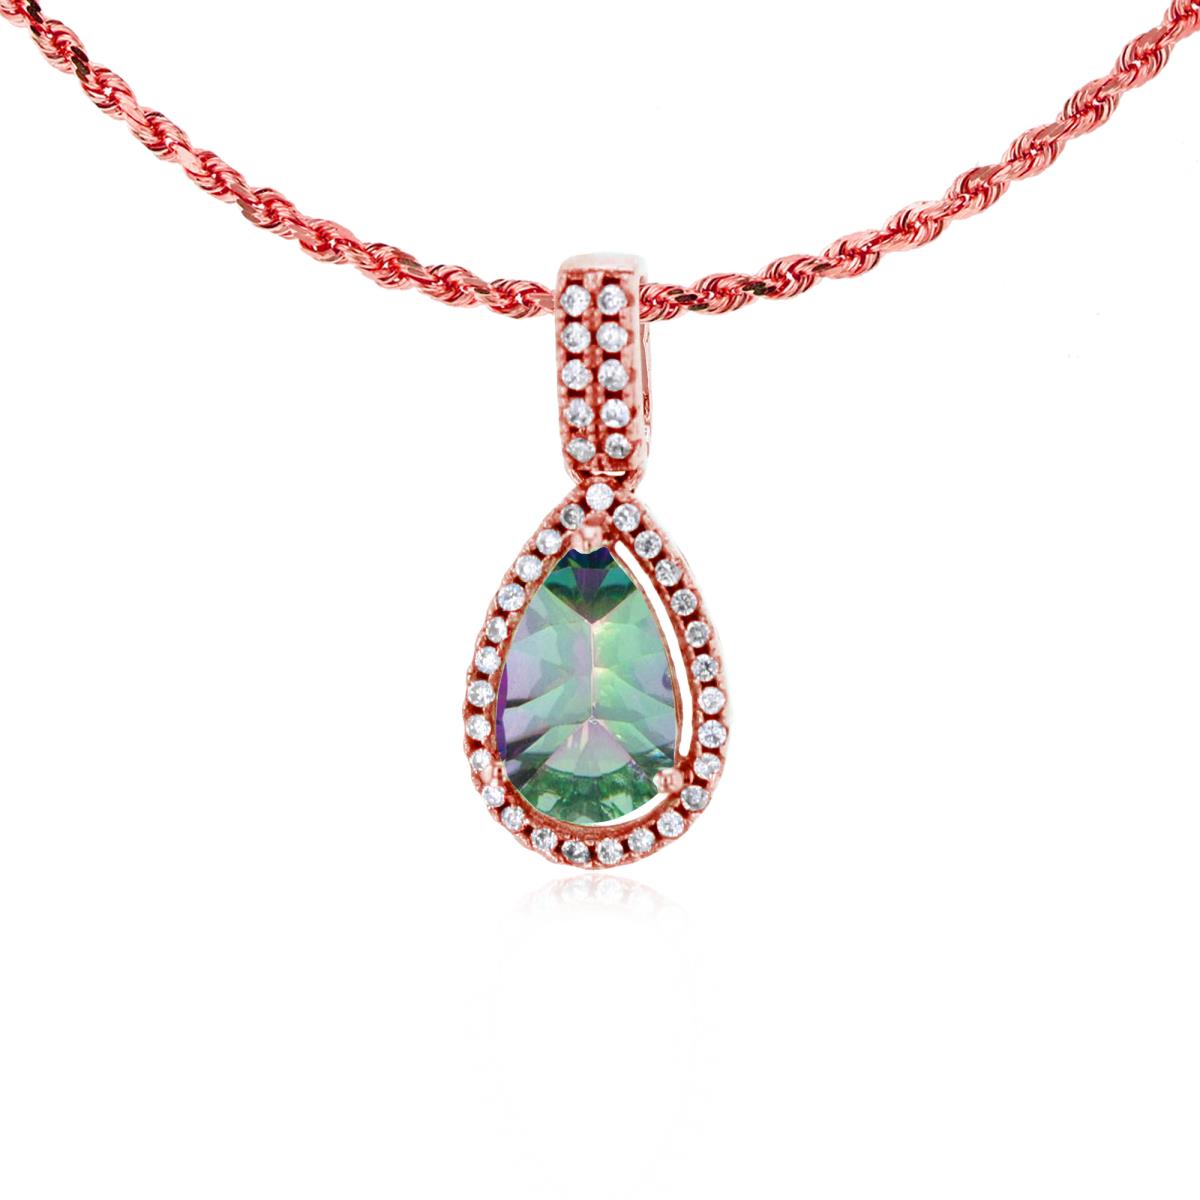 10K Rose Gold 8x5mm Pear Cut Mystic Green Topaz & 0.11 CTTW Diamond Halo 18" Rope Chain Necklace